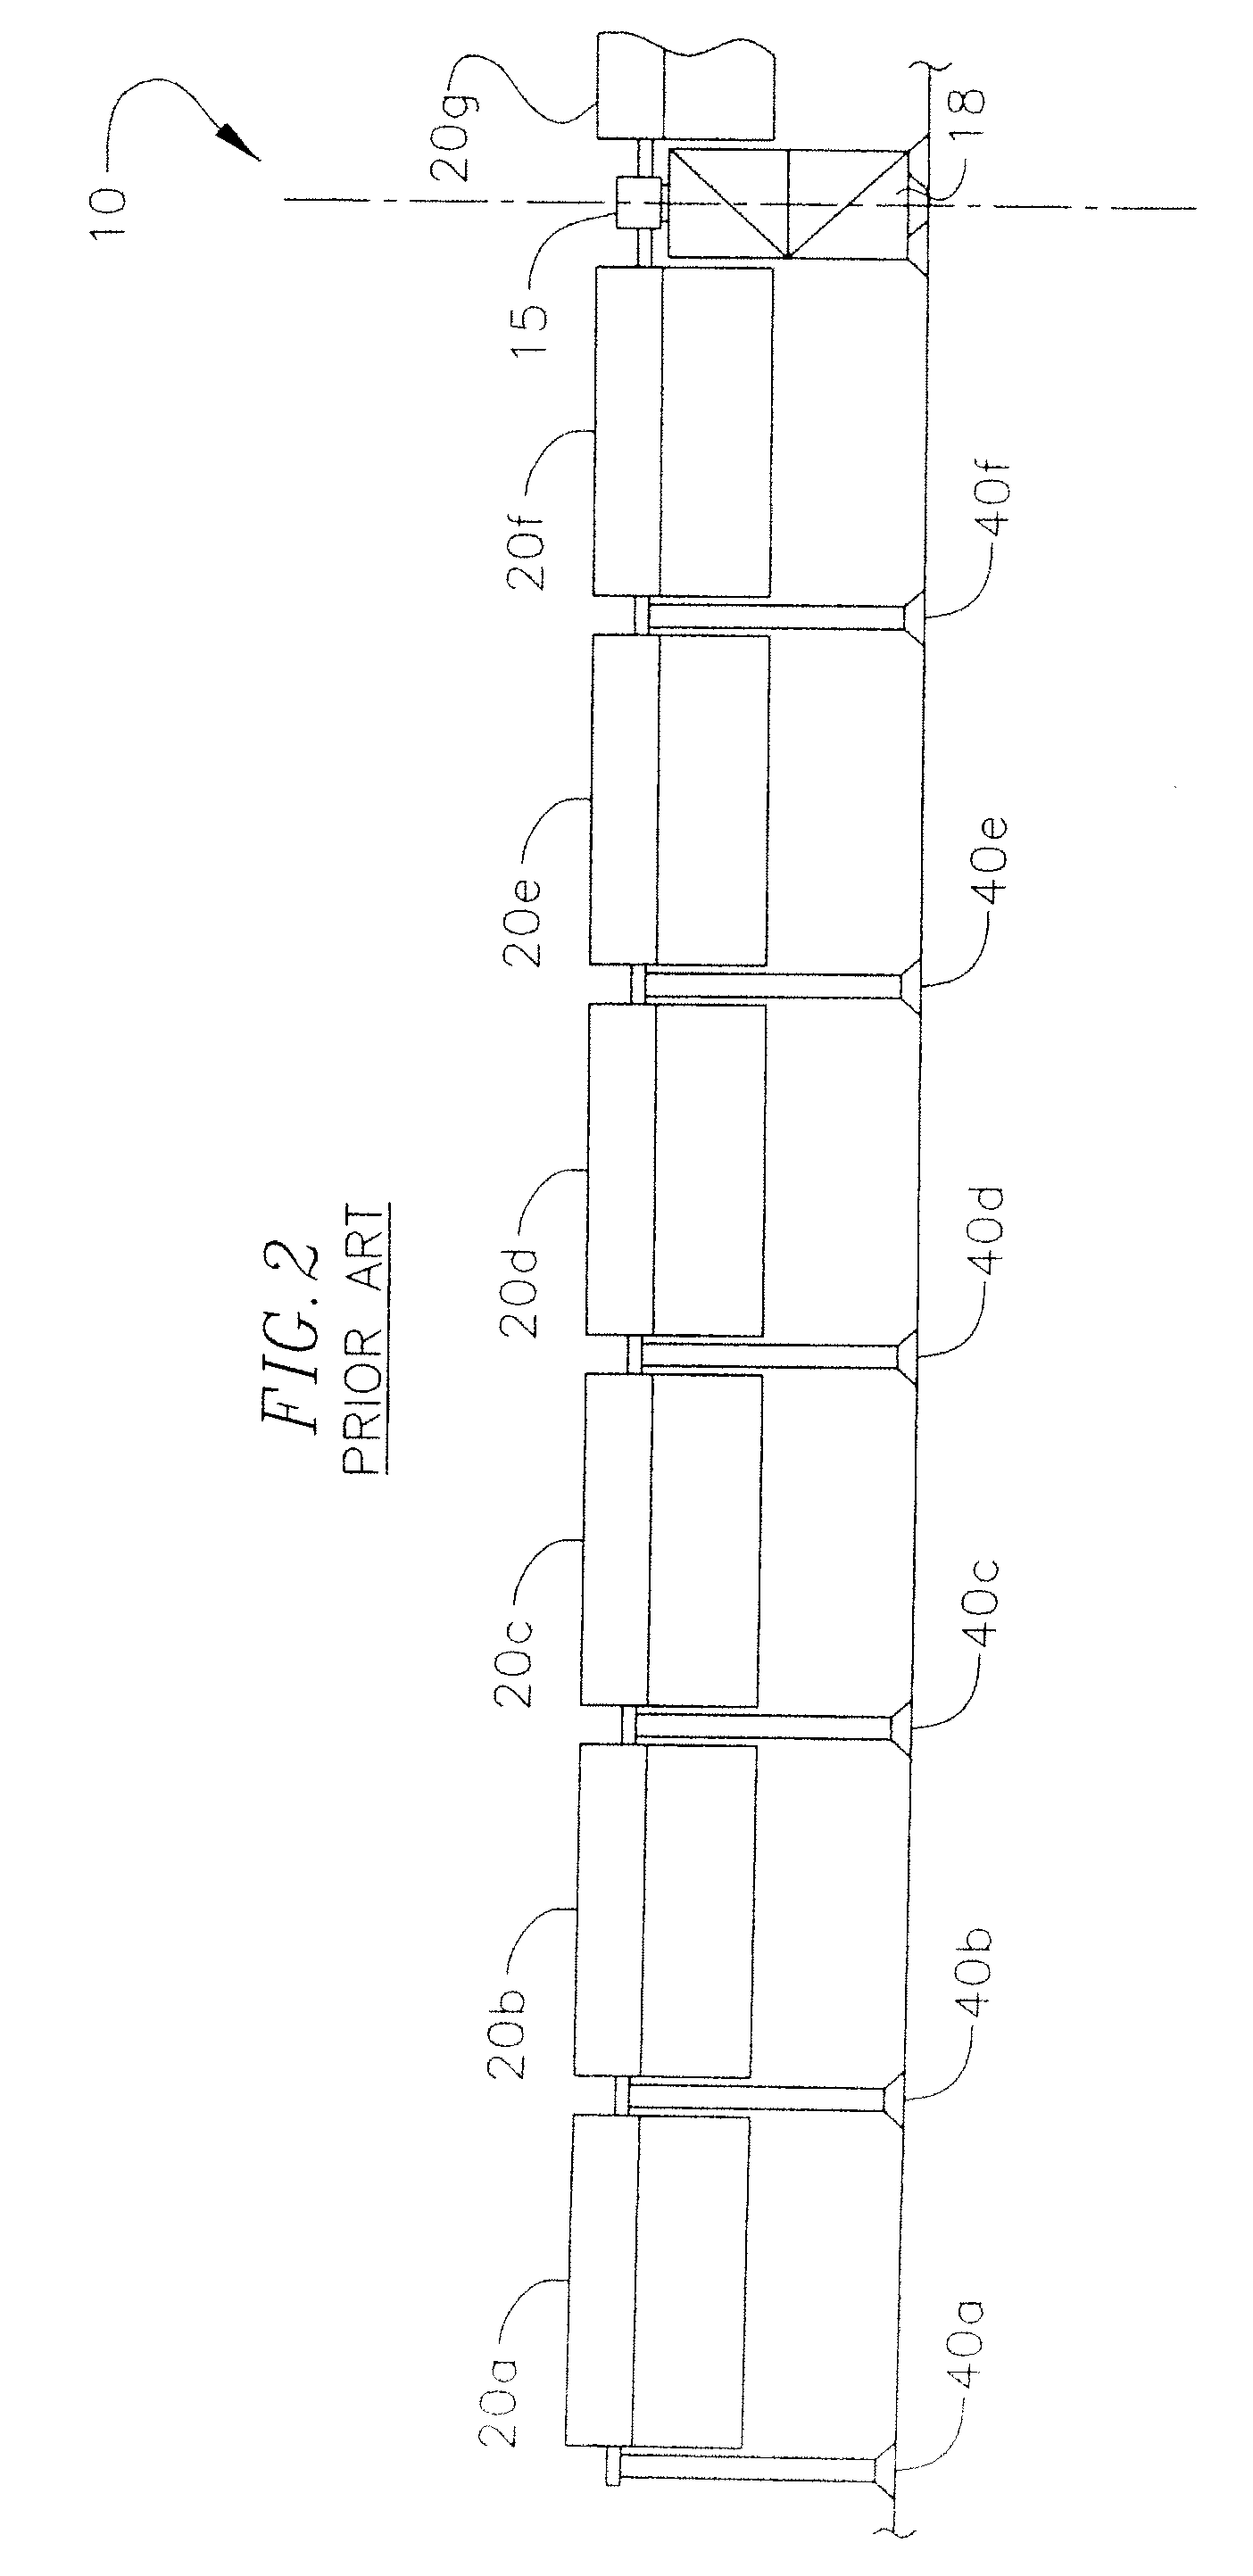 Multiplexed torque brake system for a solar concentrator assembly